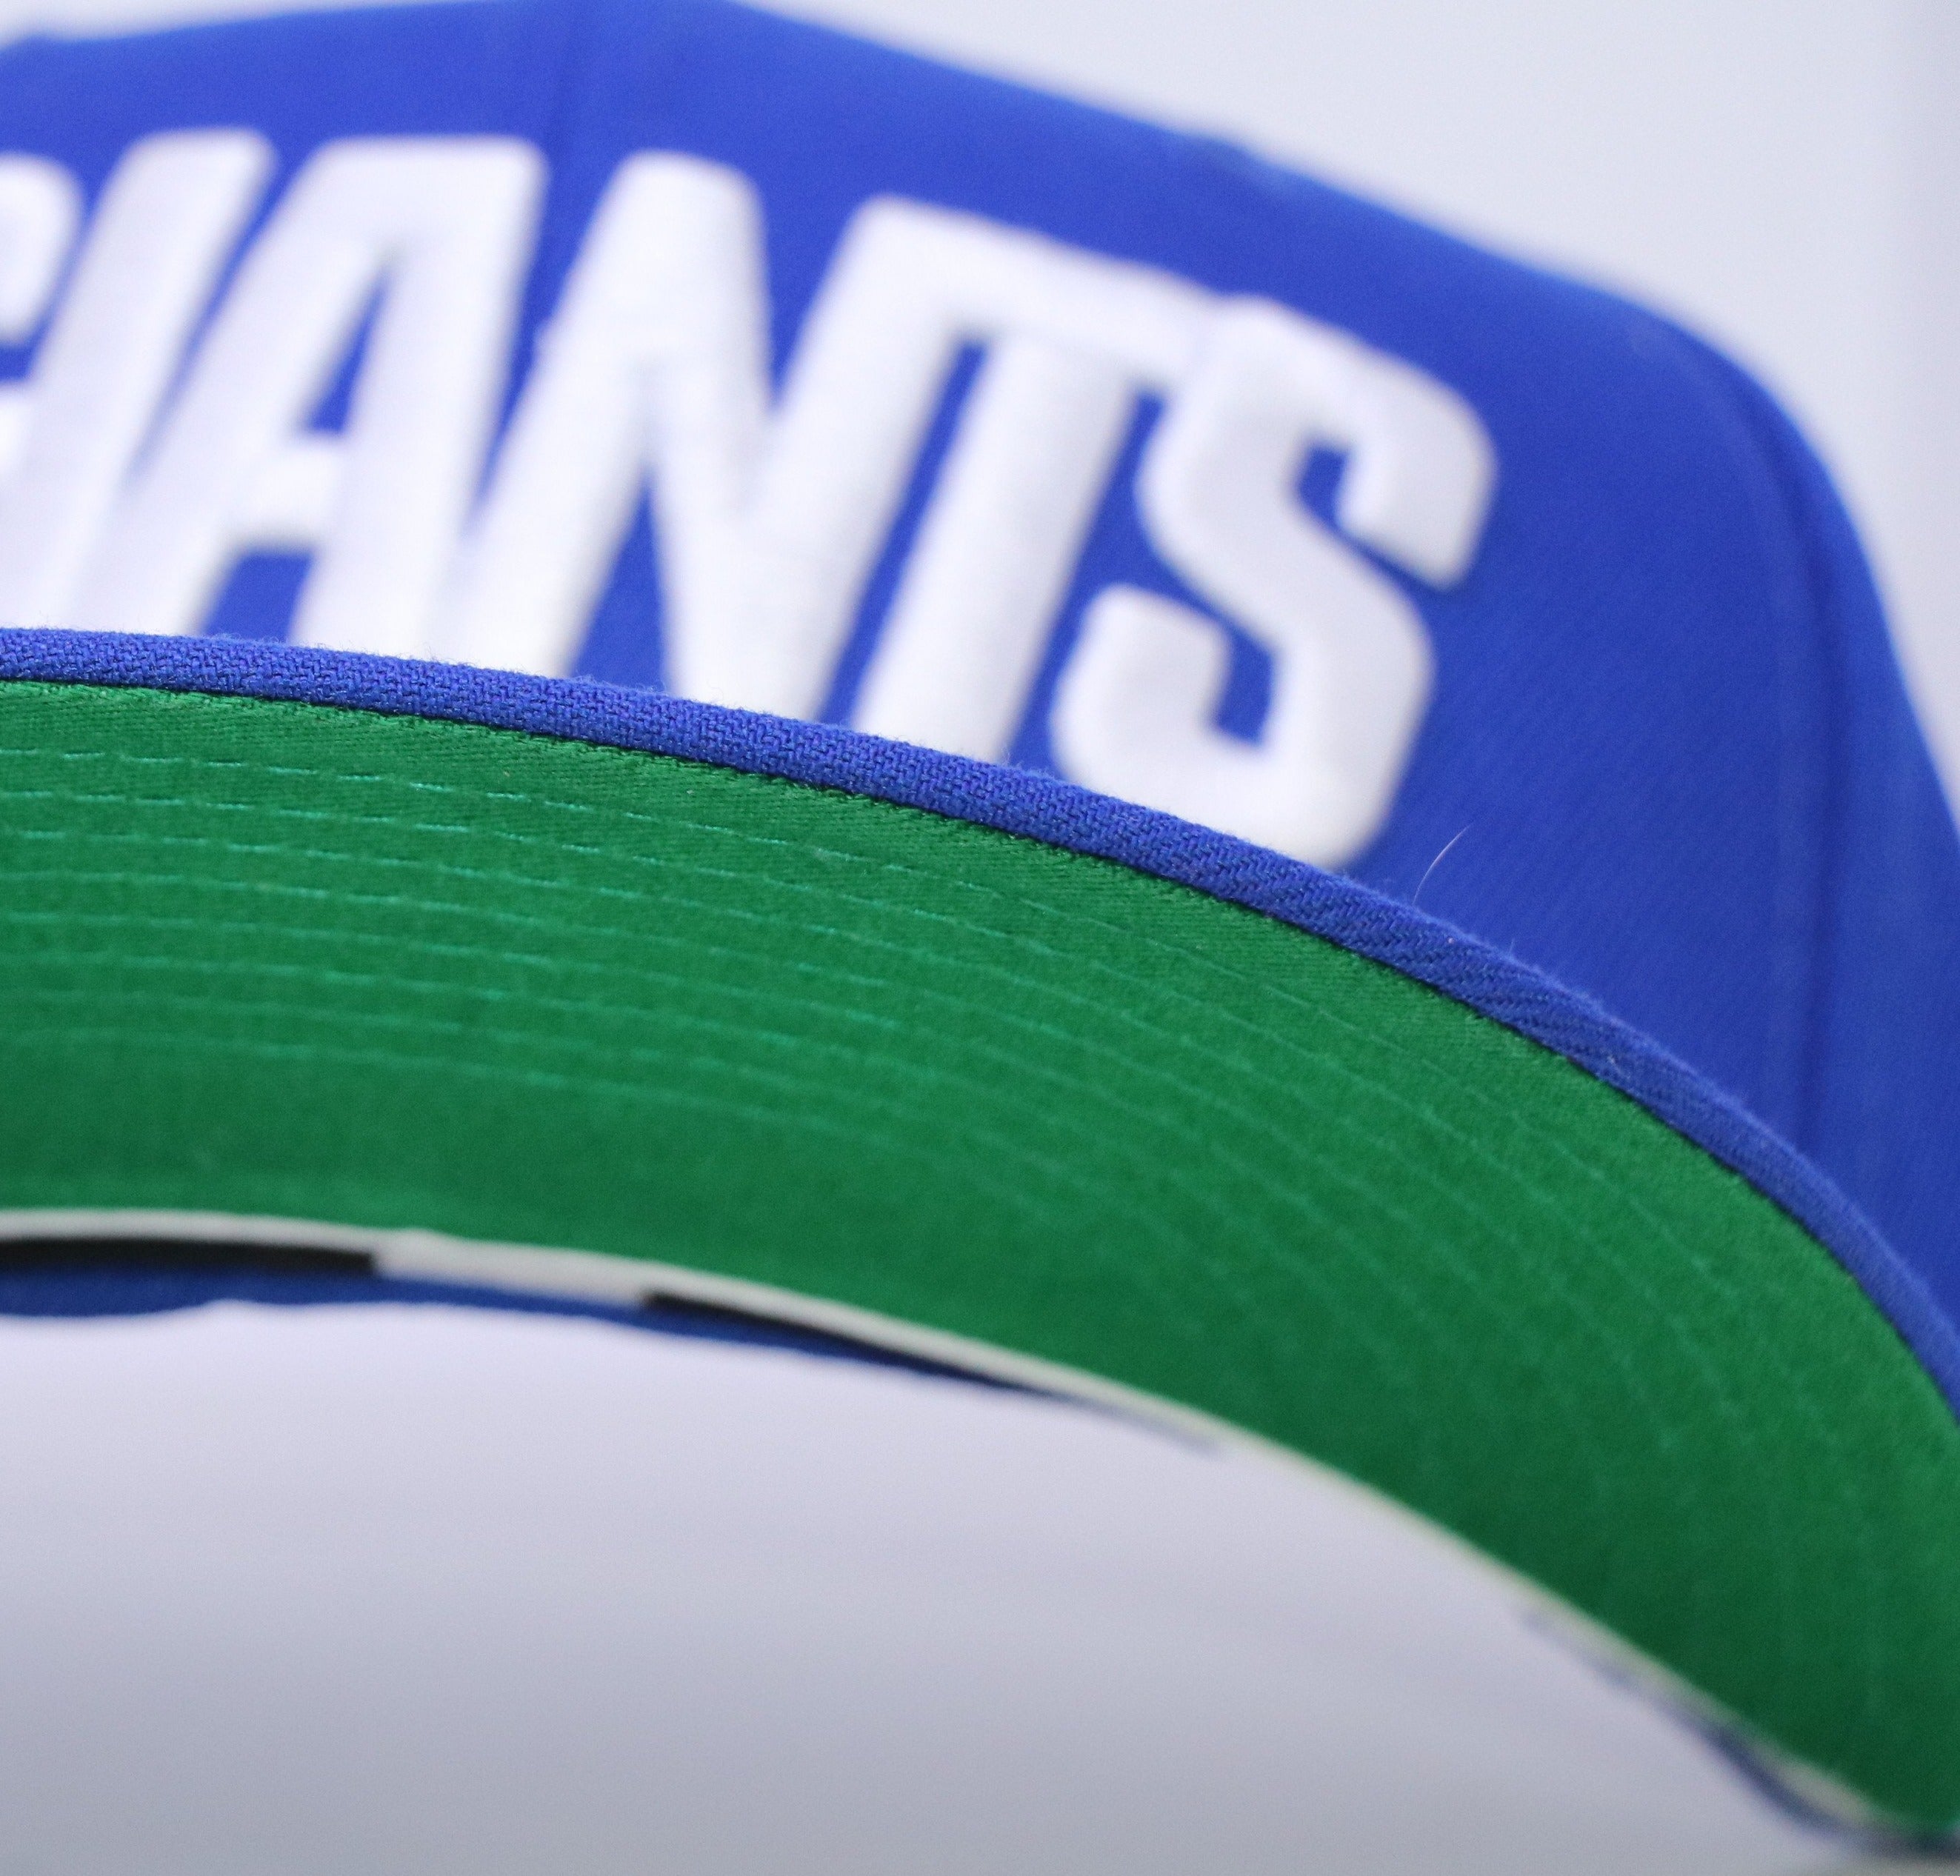 NEW YORK GIANTS "PRO BOWL" NEW ERA 59FIFTY FITTED